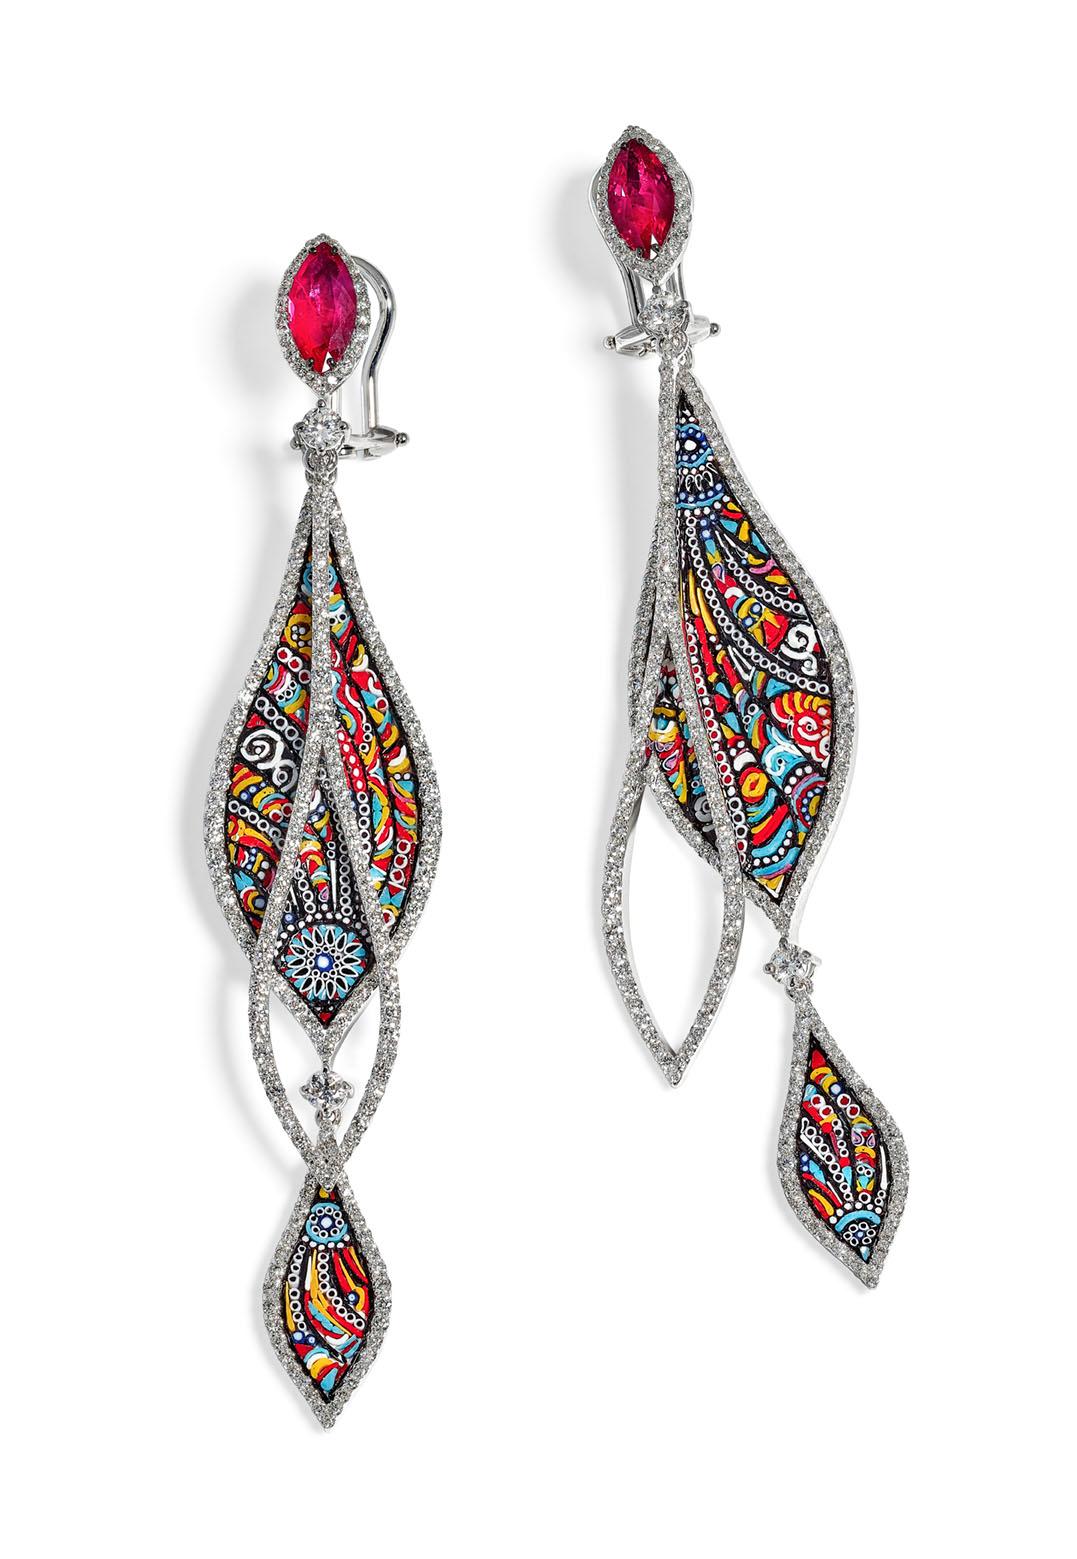 Marquise Cut Stylish Earrings White Gold White Diamonds Ruby Hand Decorated with NanoMosaic For Sale